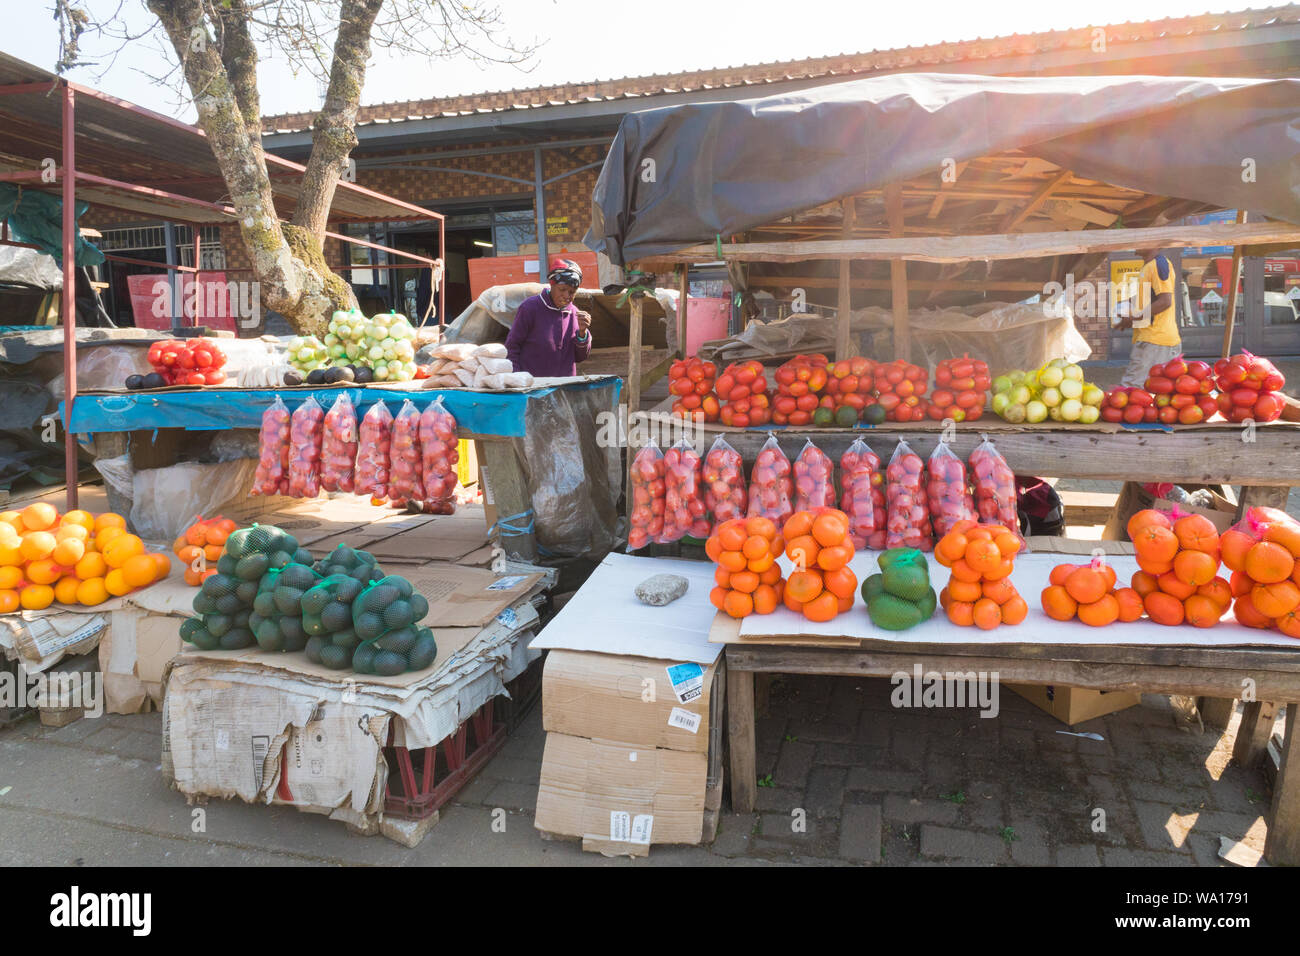 Black African lady or woman at her street vendor stall which displays a selection of bags of fruits and vegetables in Graskop,Mpumalanga, South Africa Stock Photo